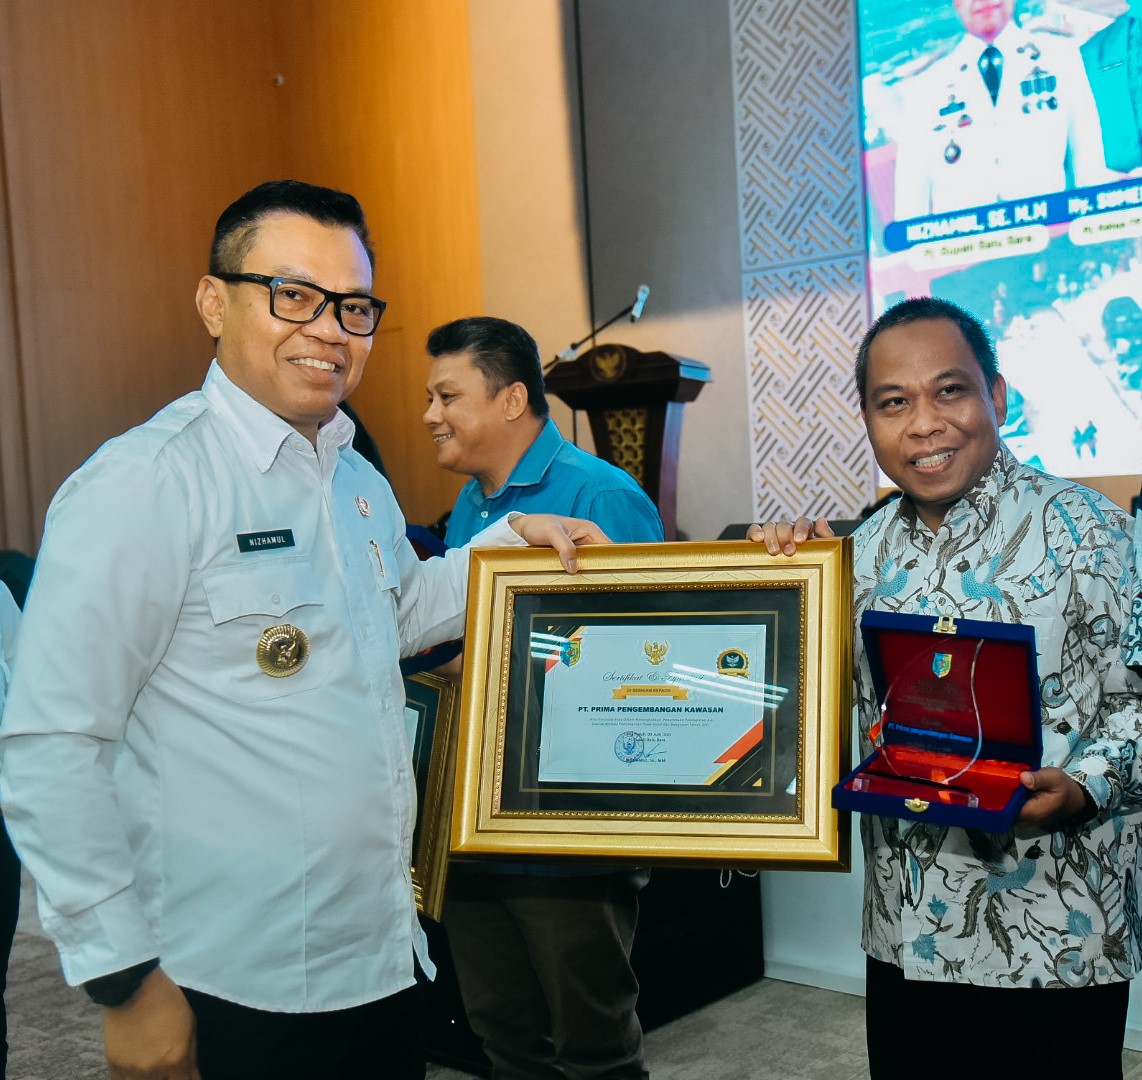 Acting Regent of Batu Bara’s Award to PT PPK for its Contribution to Building Coal